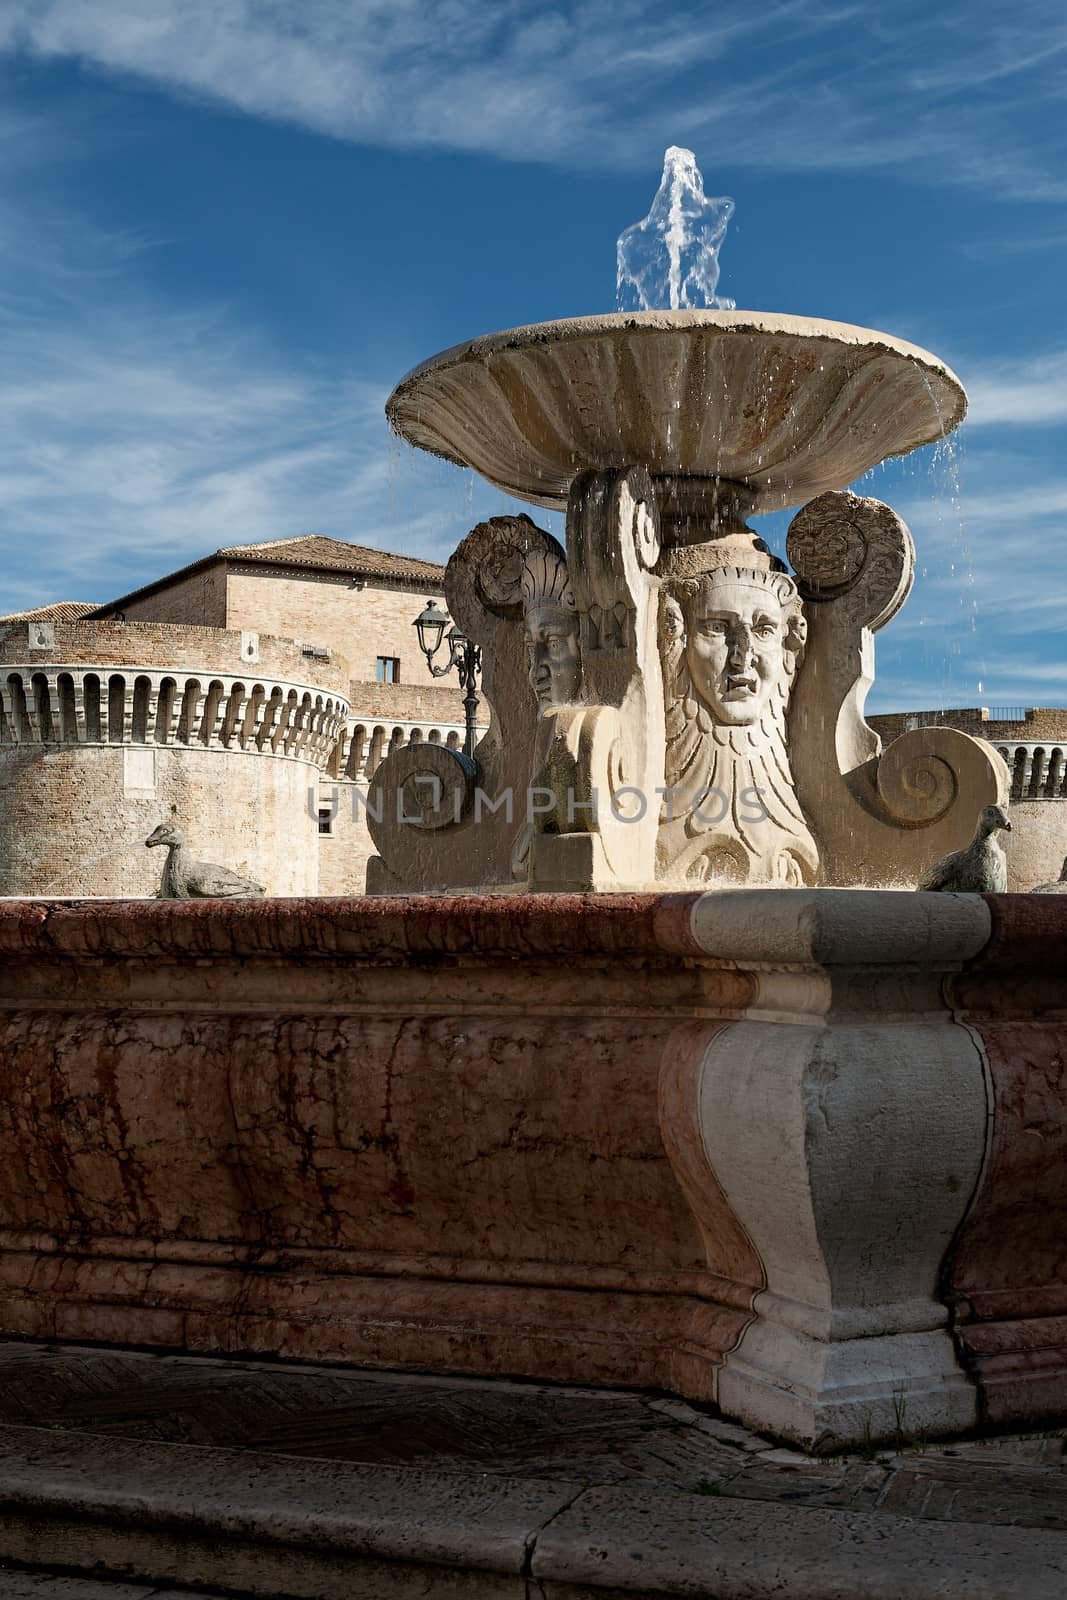 The ancient fountain in front of medieval fortress in Senigallia